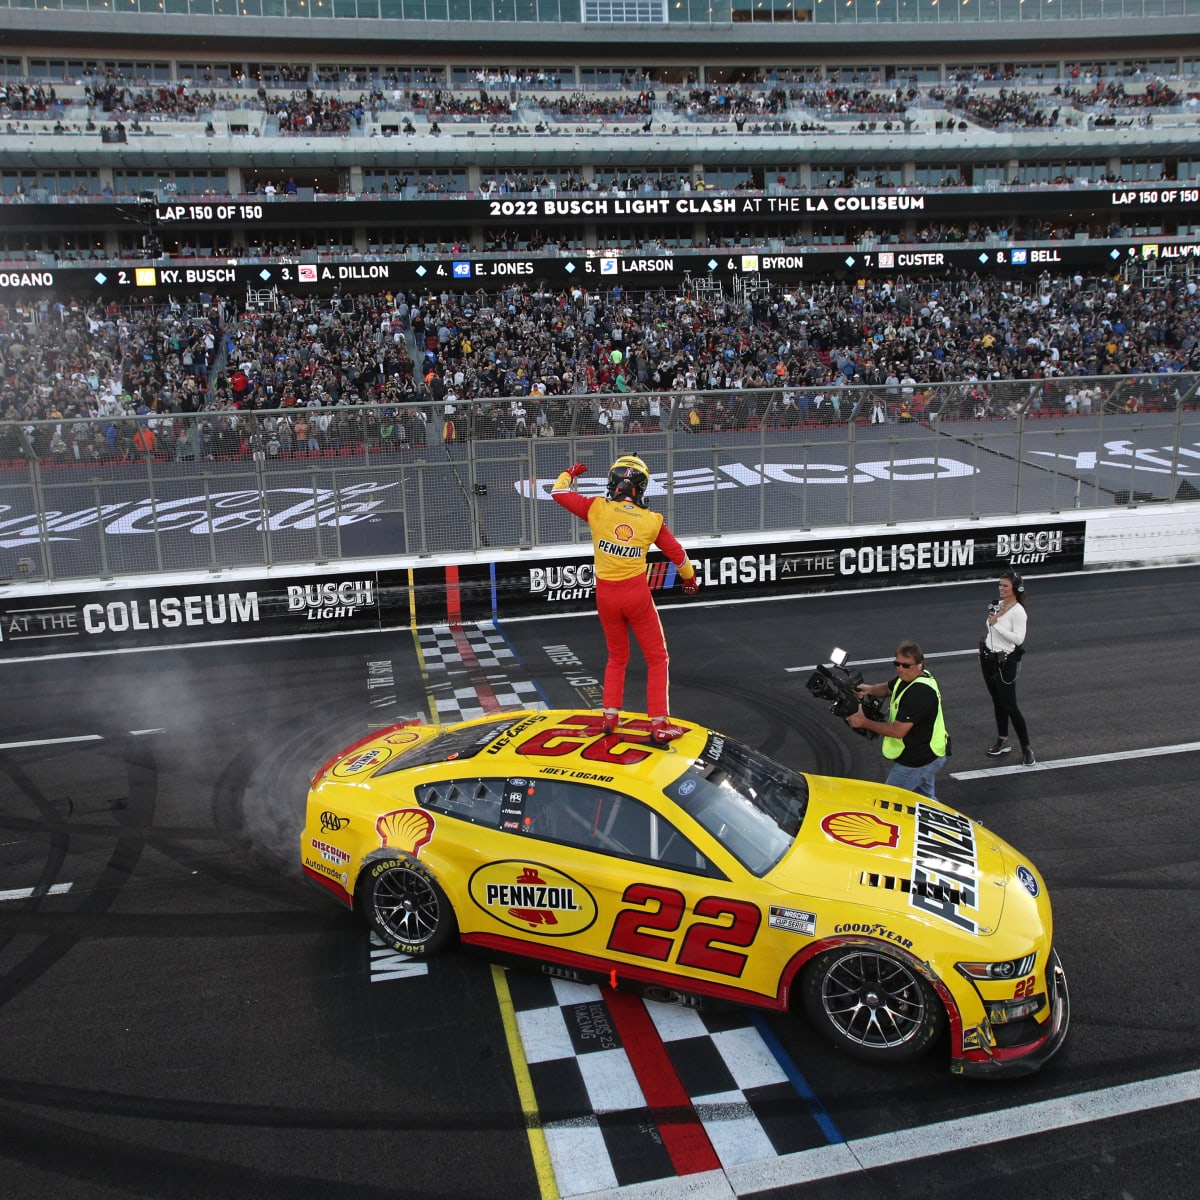 Clash lives up to its name as Joey Logano holds off Kyle Busch in first NASCAR race of 2022